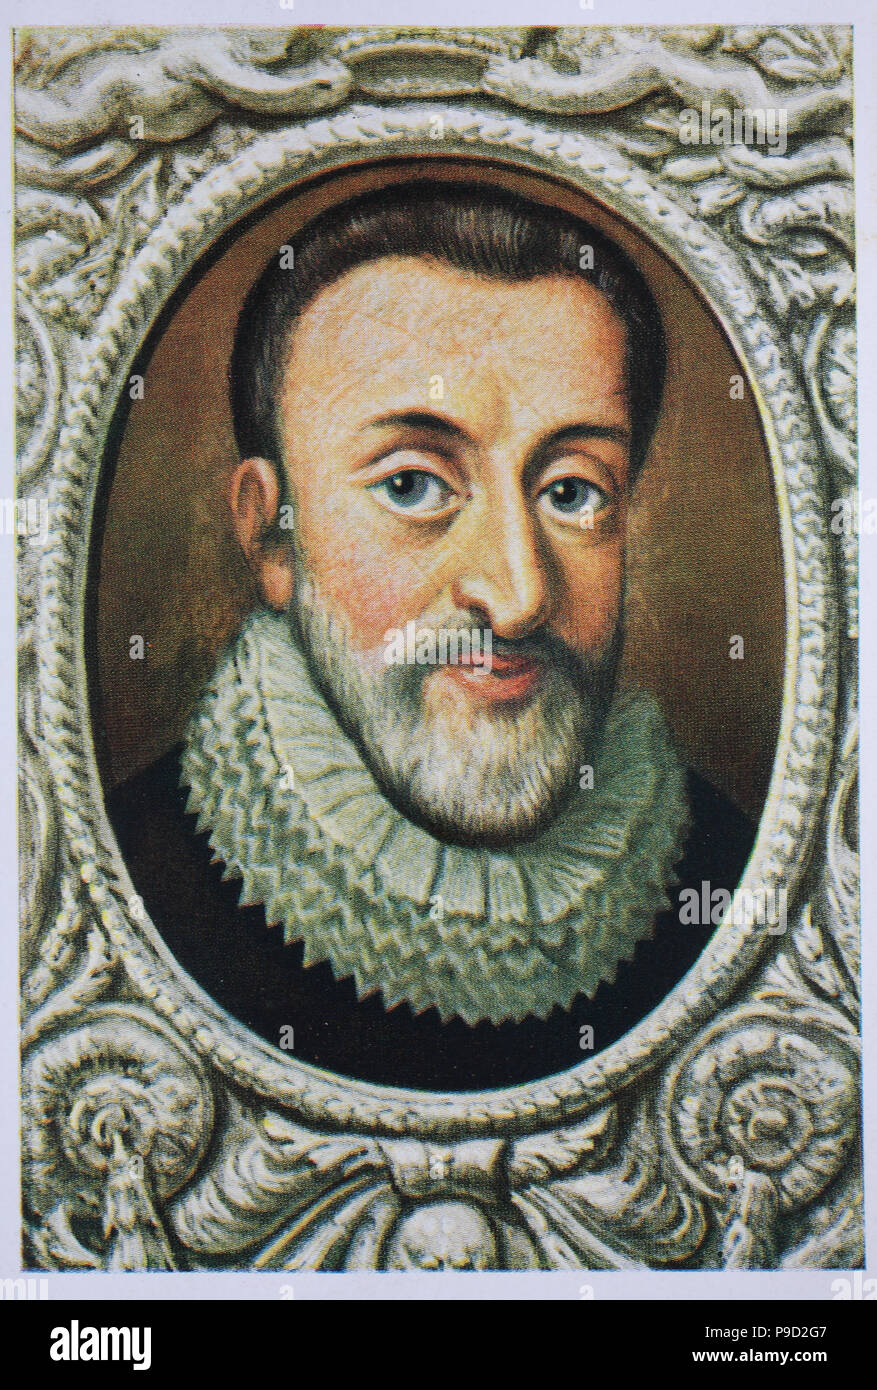 Henry IV, Henri IV, read as Henri-Quatre; 13 December 1553 â€“ 14 May 1610, also known by the epithet Good King Henry, was King of Navarre from 1572 to 1610 and King of France from 1589 to 1610, digital improved reproduction of an original print from the year 1900 Stock Photo